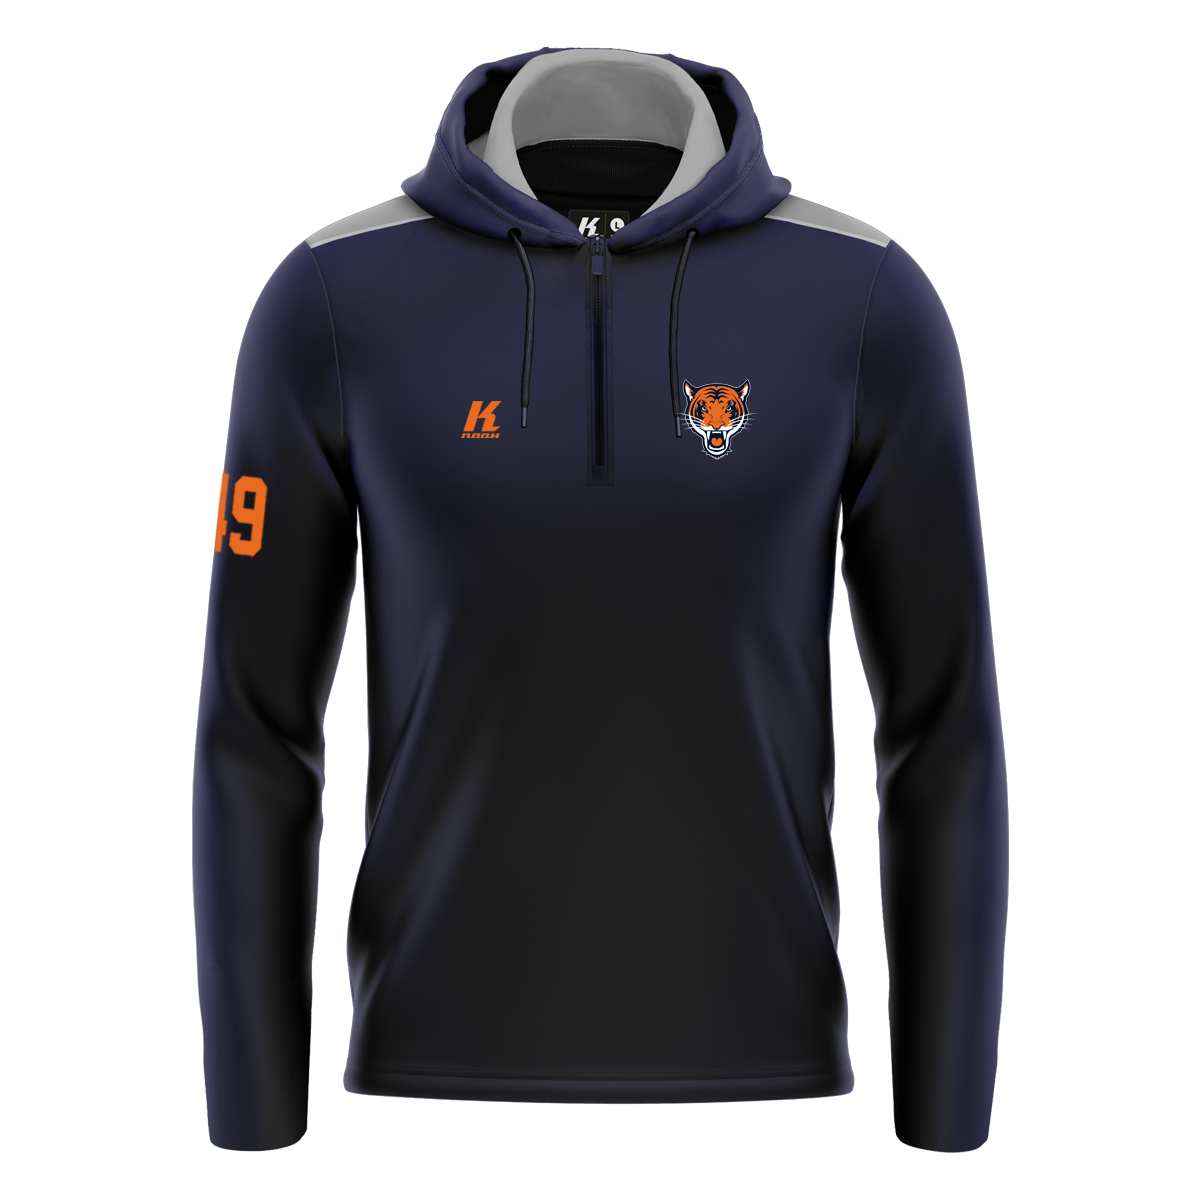 Tigers K.Tech-Fiber Hoodie “Heritage” with Playernumber/Initials